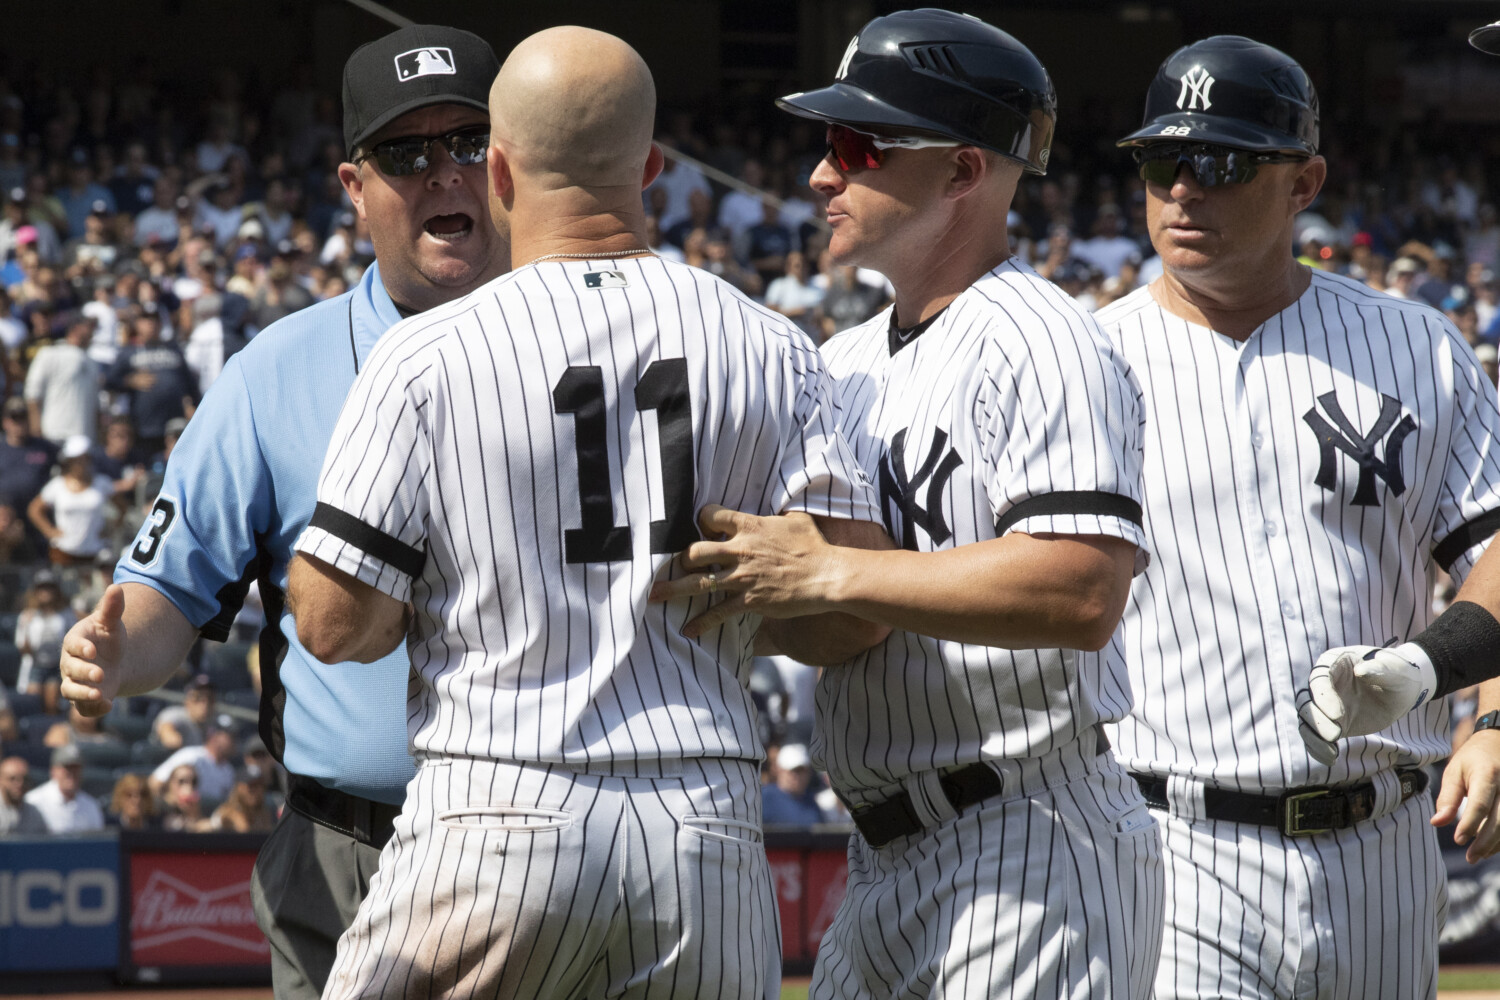 MLB roundup: Judge, Volpe spark Yankees to win over Marlins